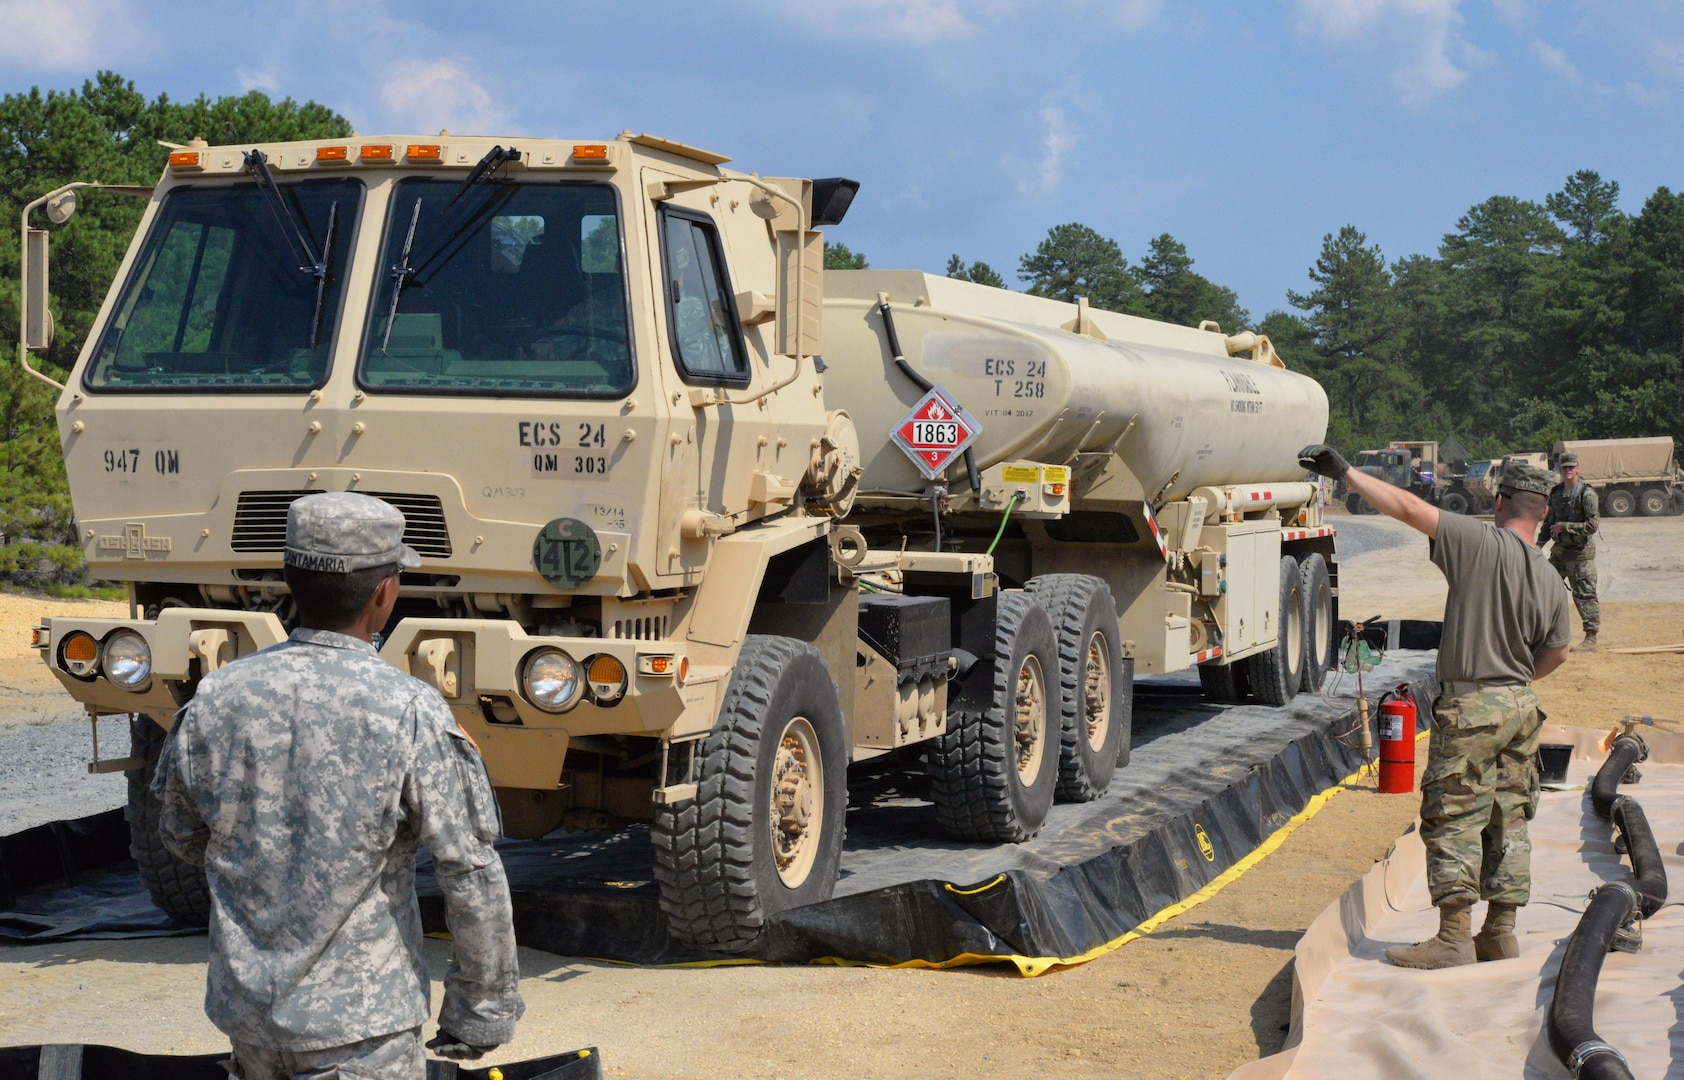 Soldiers with the 947th Quartermaster Company, Chambersburg, PA, receive a fuel truck at a fuel system supply point July 19, 2017, at Joint Base McGuire-Dix-Lakehurst, N.J., during a Quartermaster Liquid Logistic Exercise. The exercise tested the Soldiers capability to safely and efficiently receive incoming fuel trucks and download thousands of gallons fuel. Once the fuel was received, the Soldiers cleaned and recirculated it before refilling trucks awaiting resupply. 